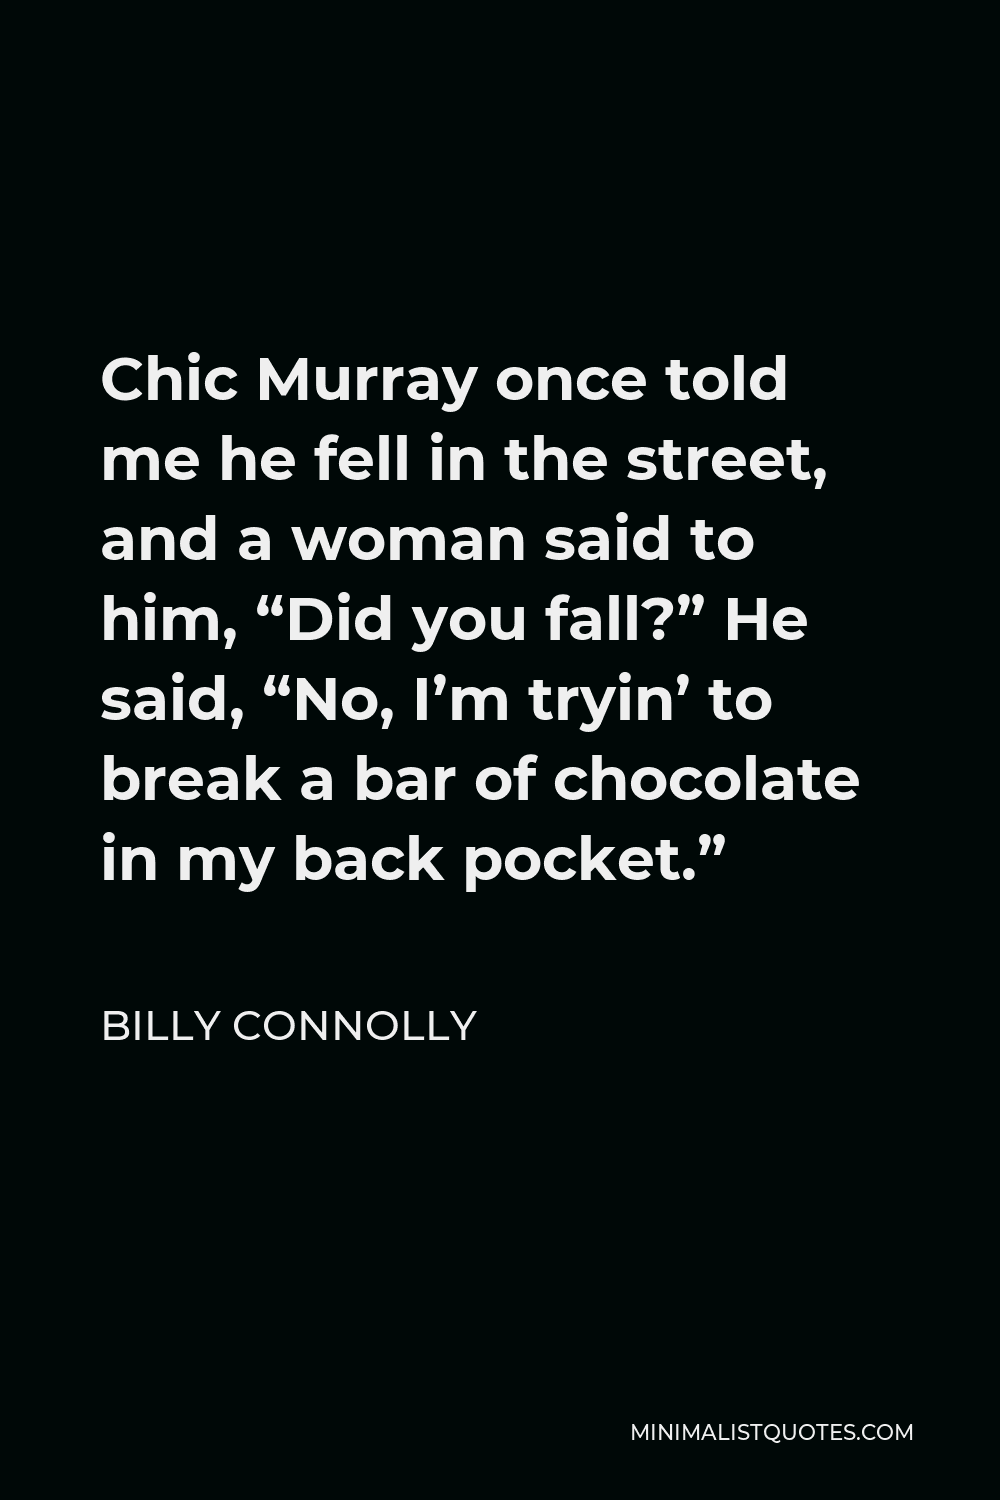 Billy Connolly Quote - Chic Murray once told me he fell in the street, and a woman said to him, “Did you fall?” He said, “No, I’m tryin’ to break a bar of chocolate in my back pocket.”